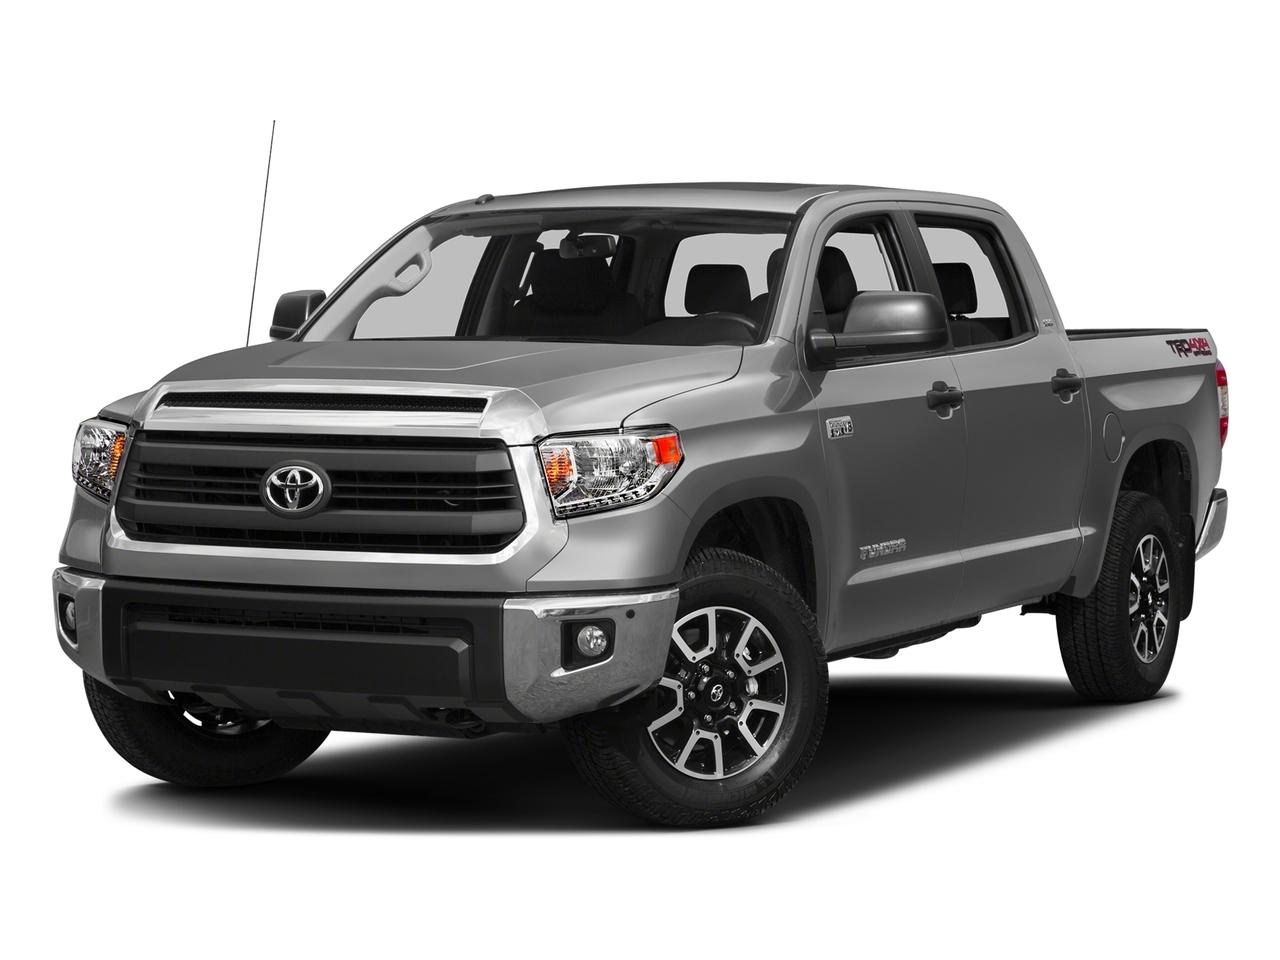 2016 Toyota Tundra 2WD Truck Vehicle Photo in Pilot Point, TX 76258-6053